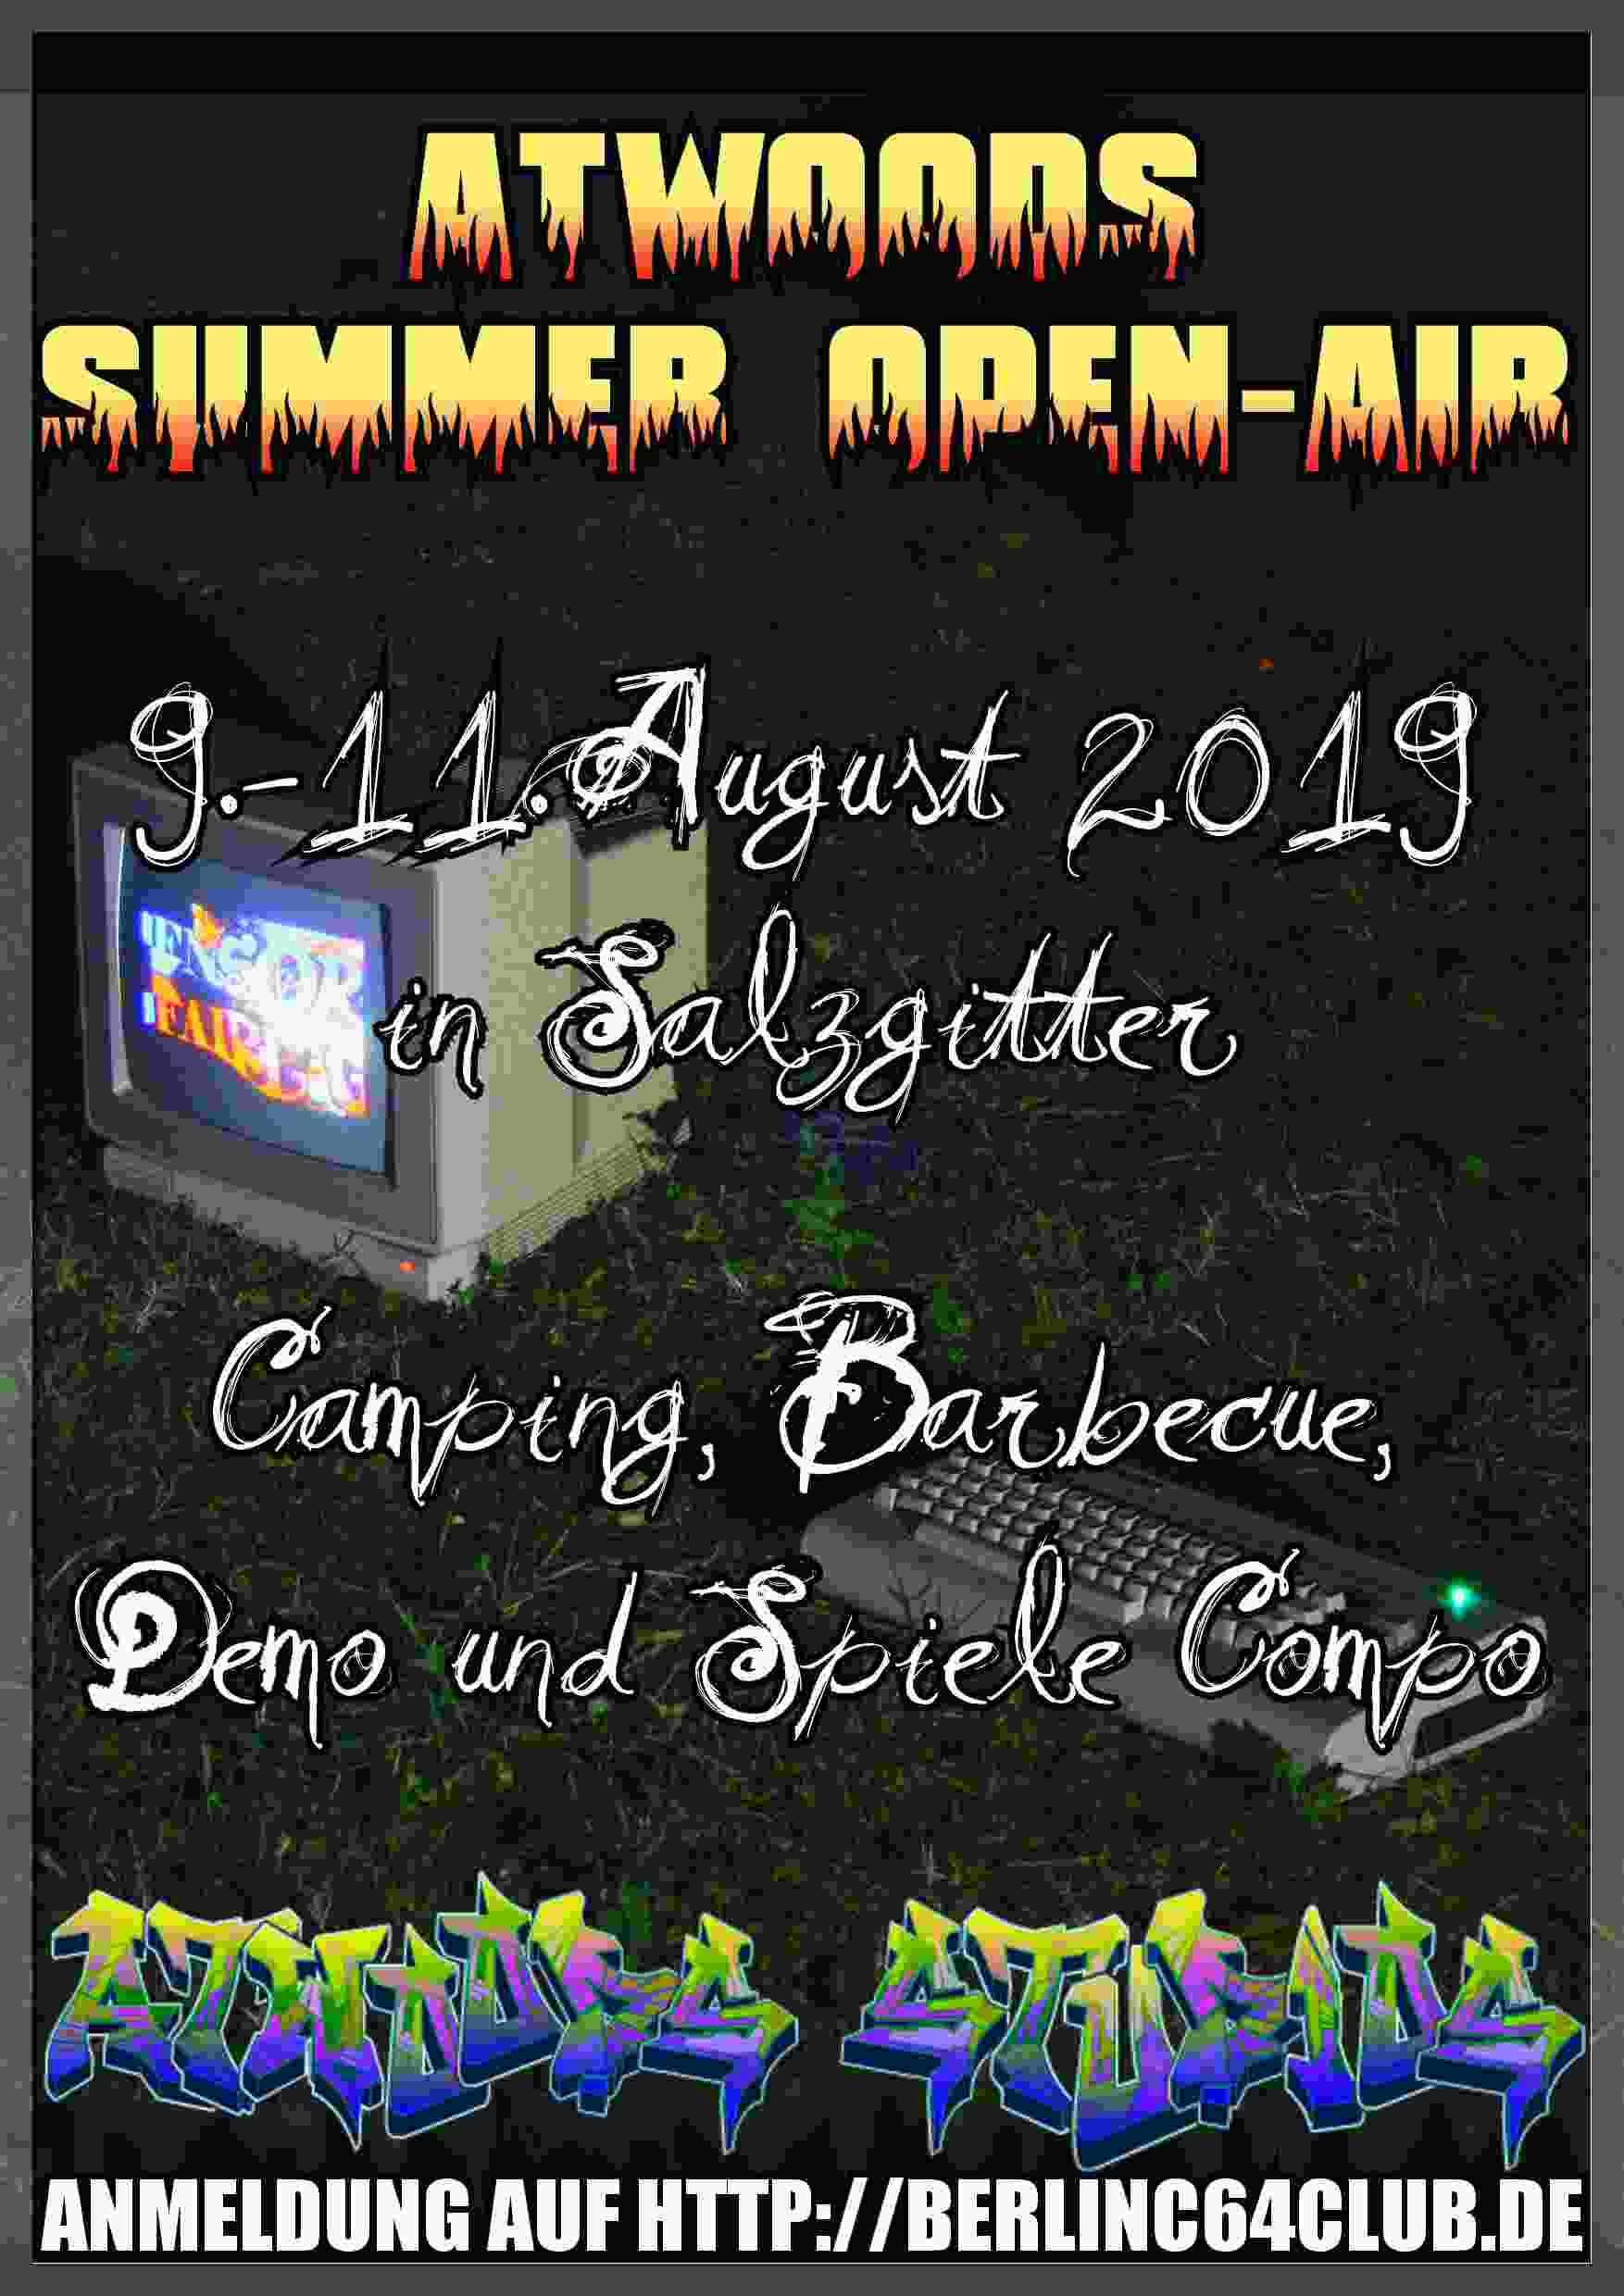 ATWOODS Summer Open-Air 2019